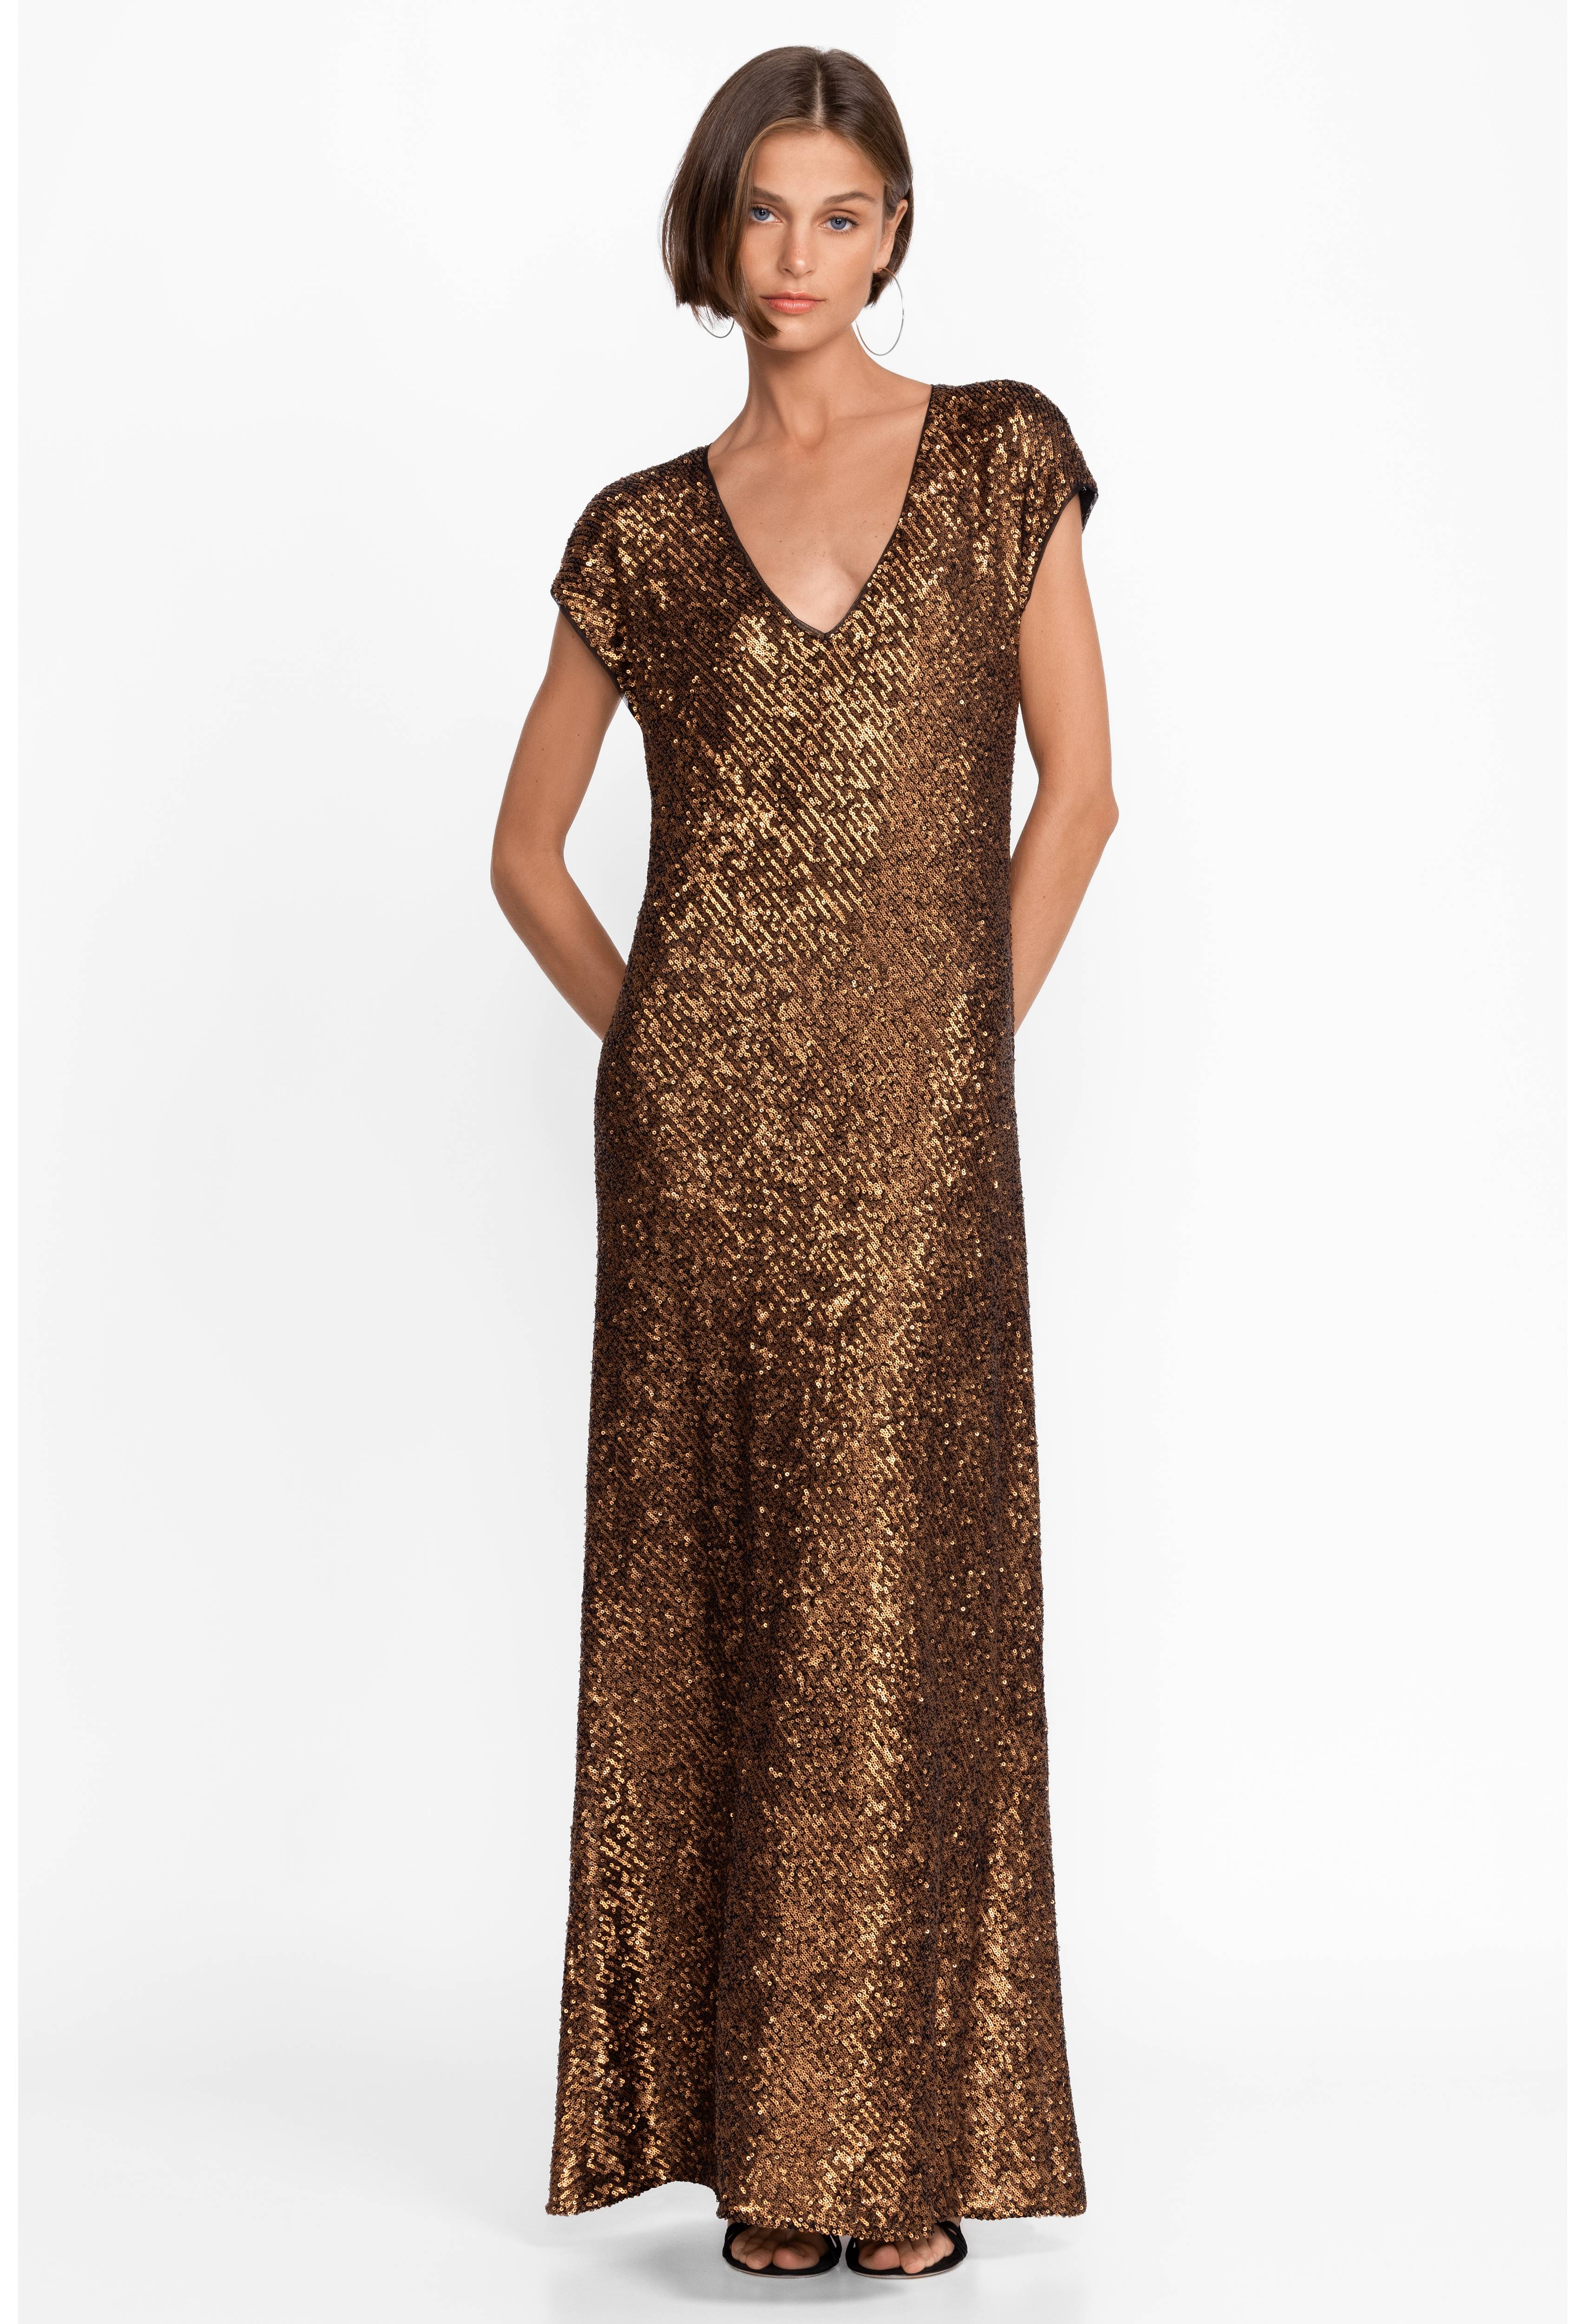 Toto Sequin Maxi Dress, , large image number 3